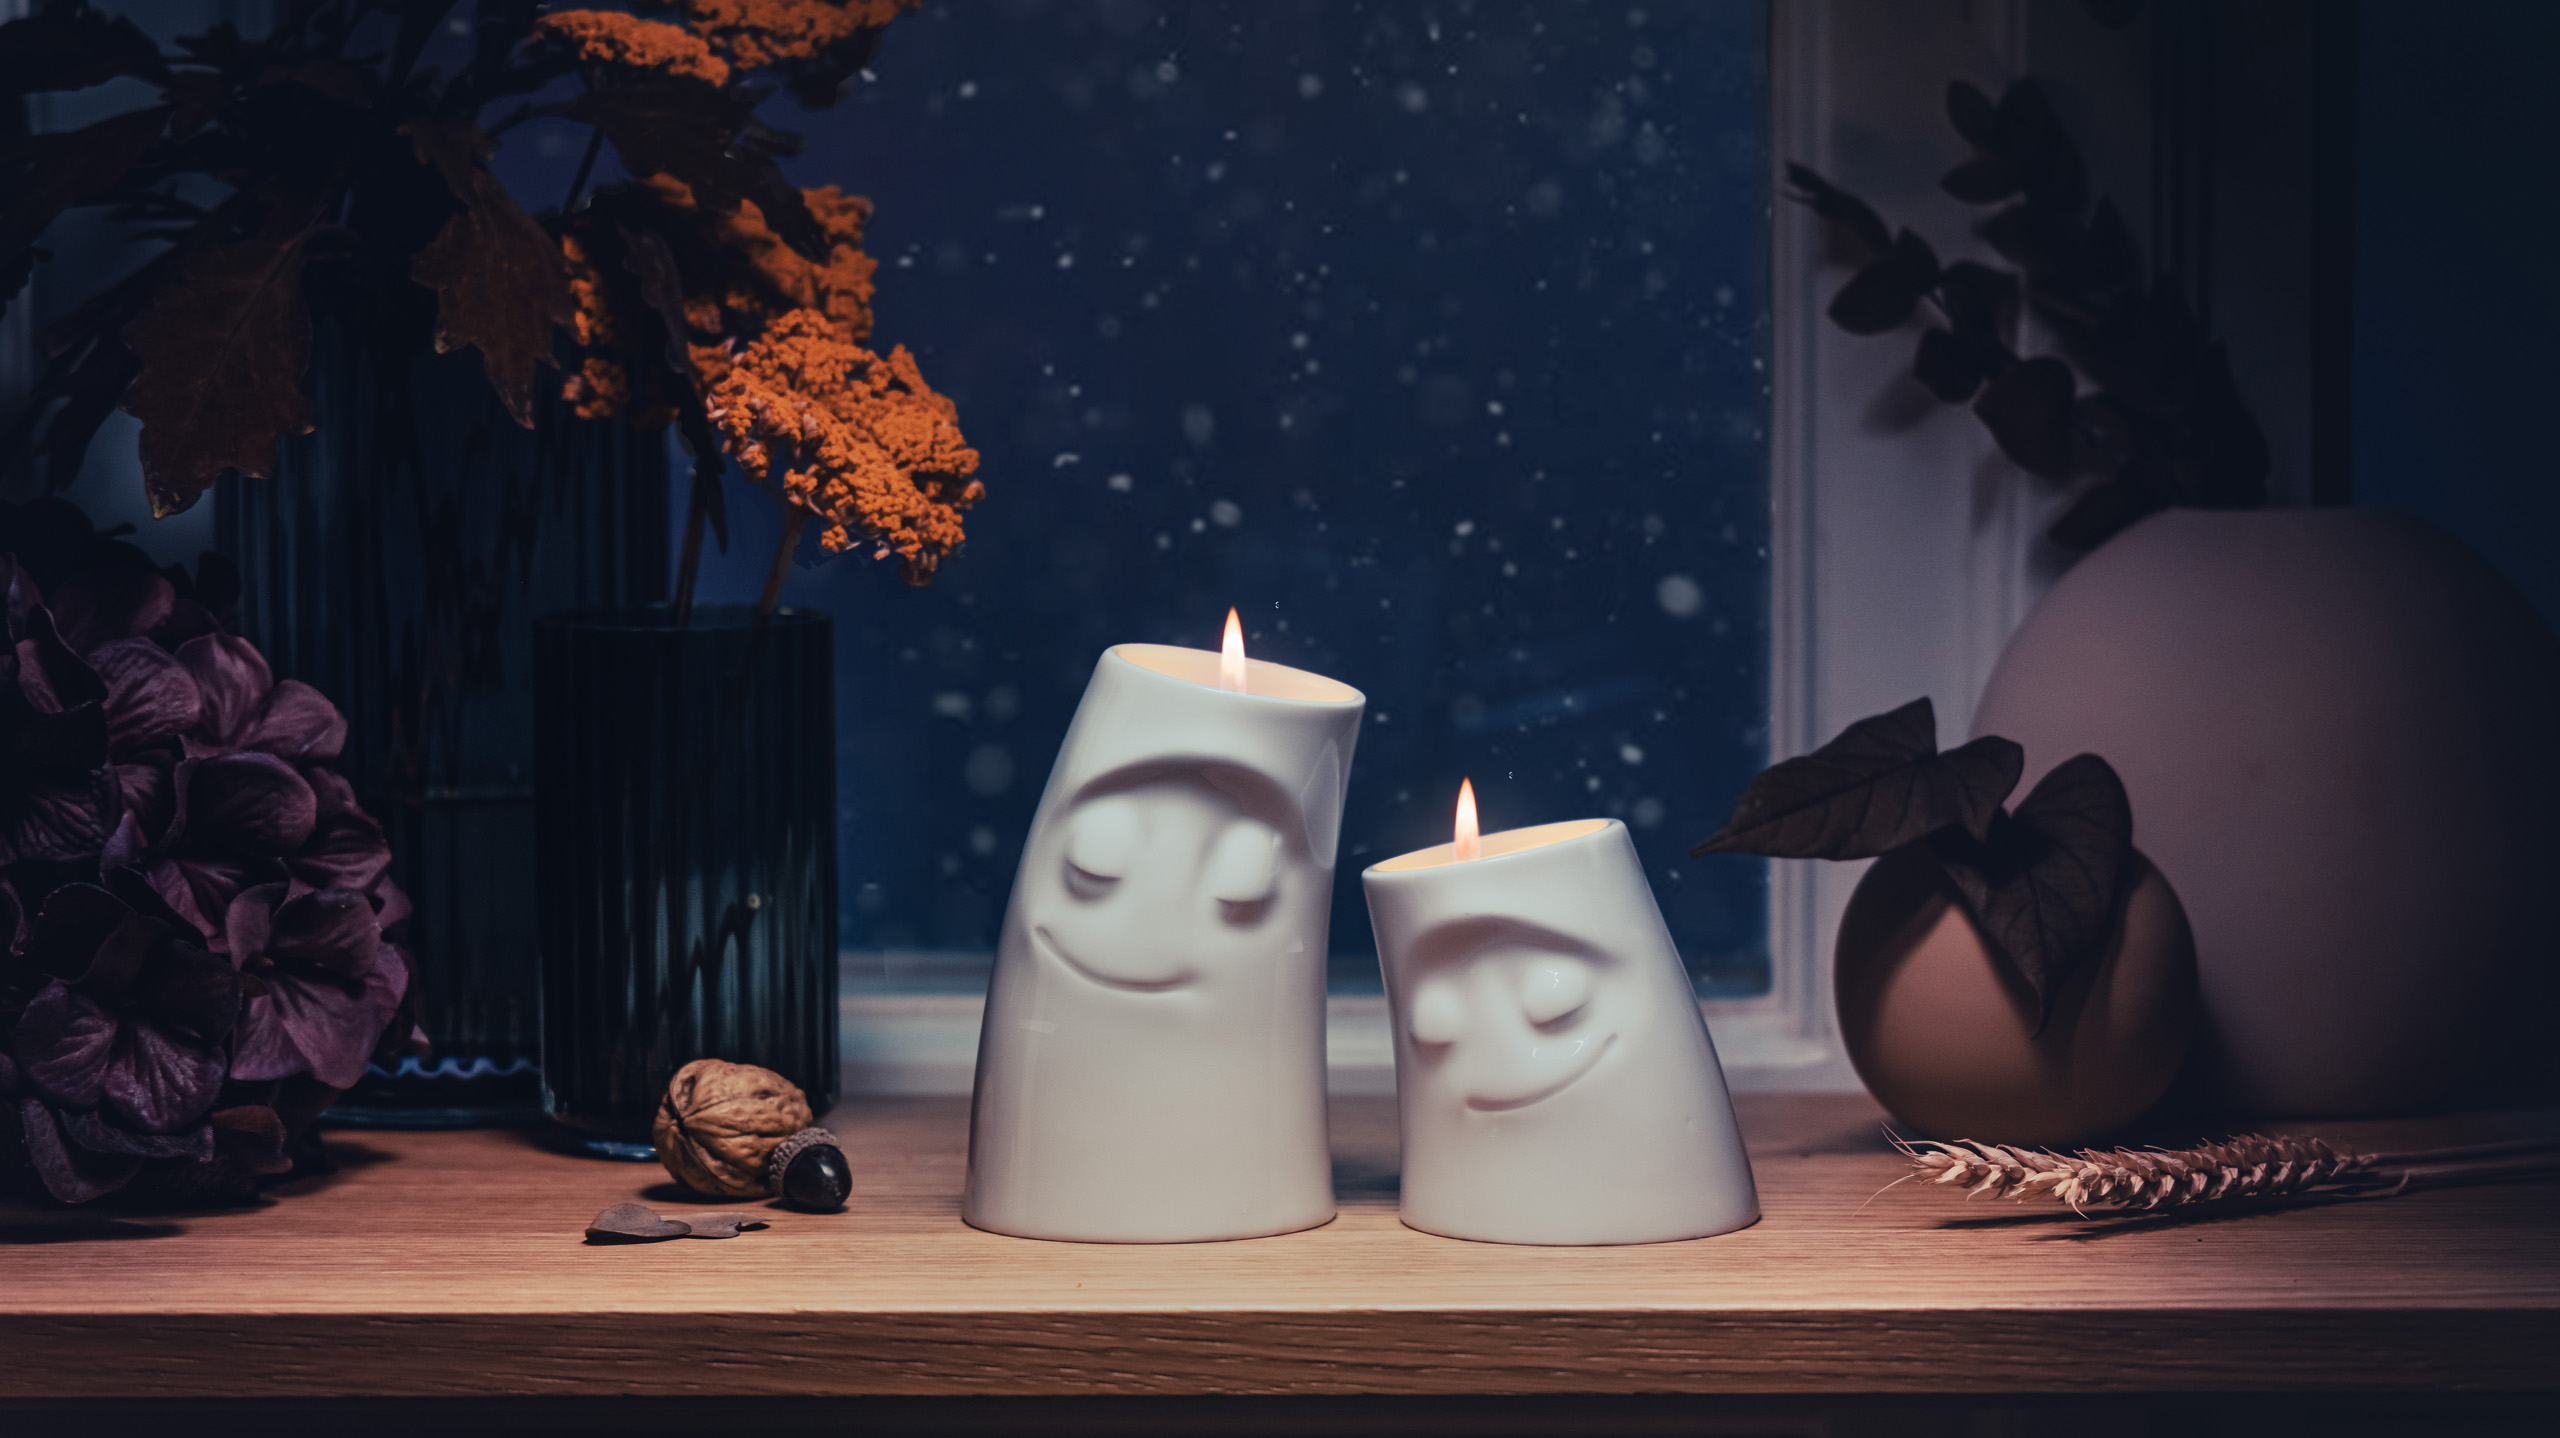 FIFTYEIGHT PRODUCTS Launches Candle Cuddlers.